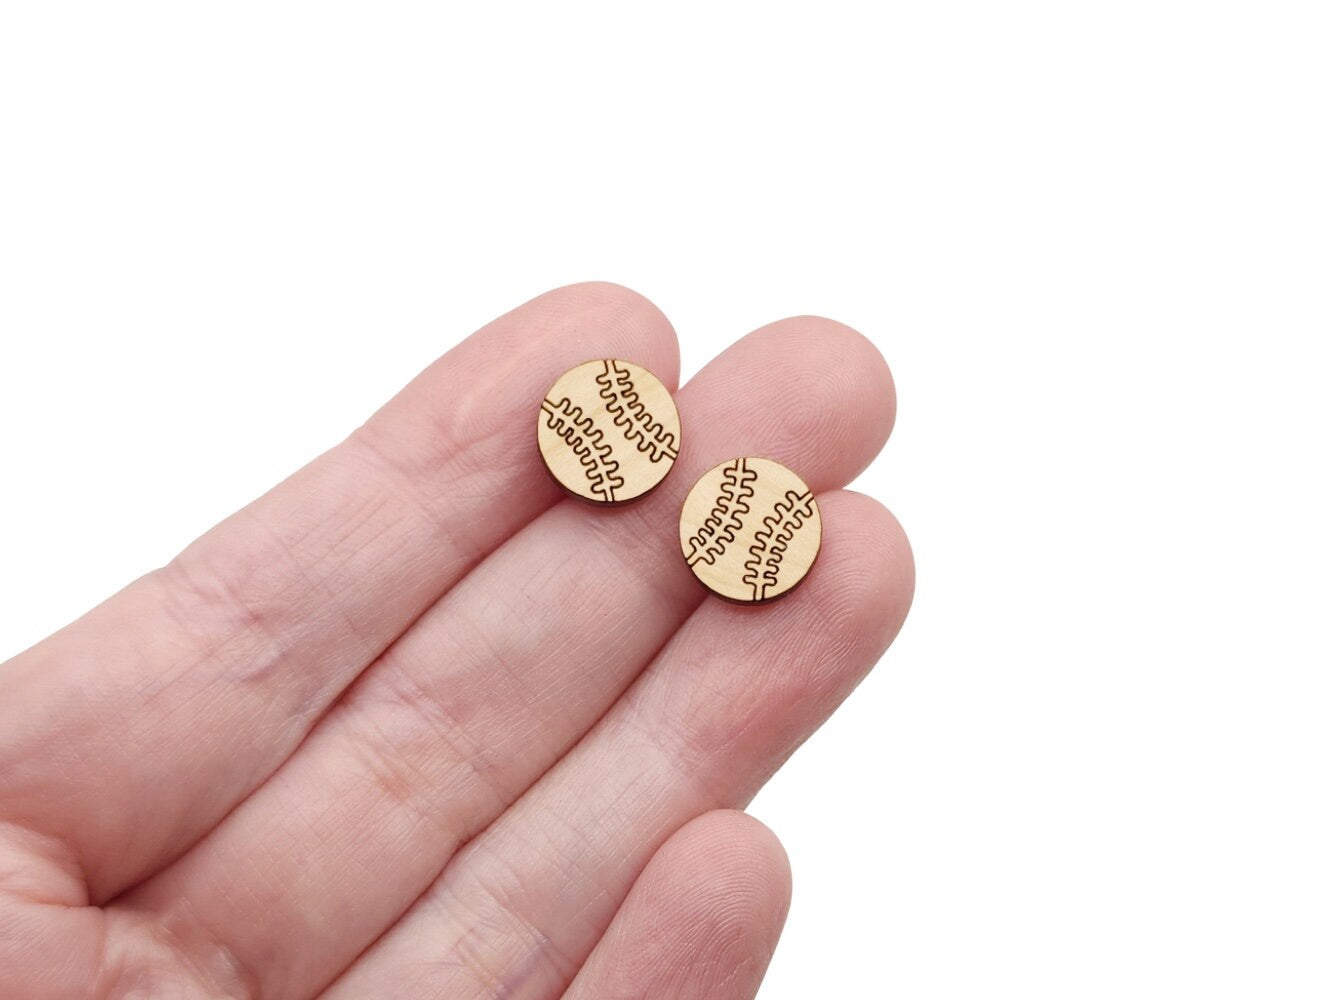 50 Pieces Wood Stud Earring Blanks 12 mm Cabochons Settings Round Wooden  Earring Posts Brown Stainless Steel Earring Bezel Blanks for Jewelry Making